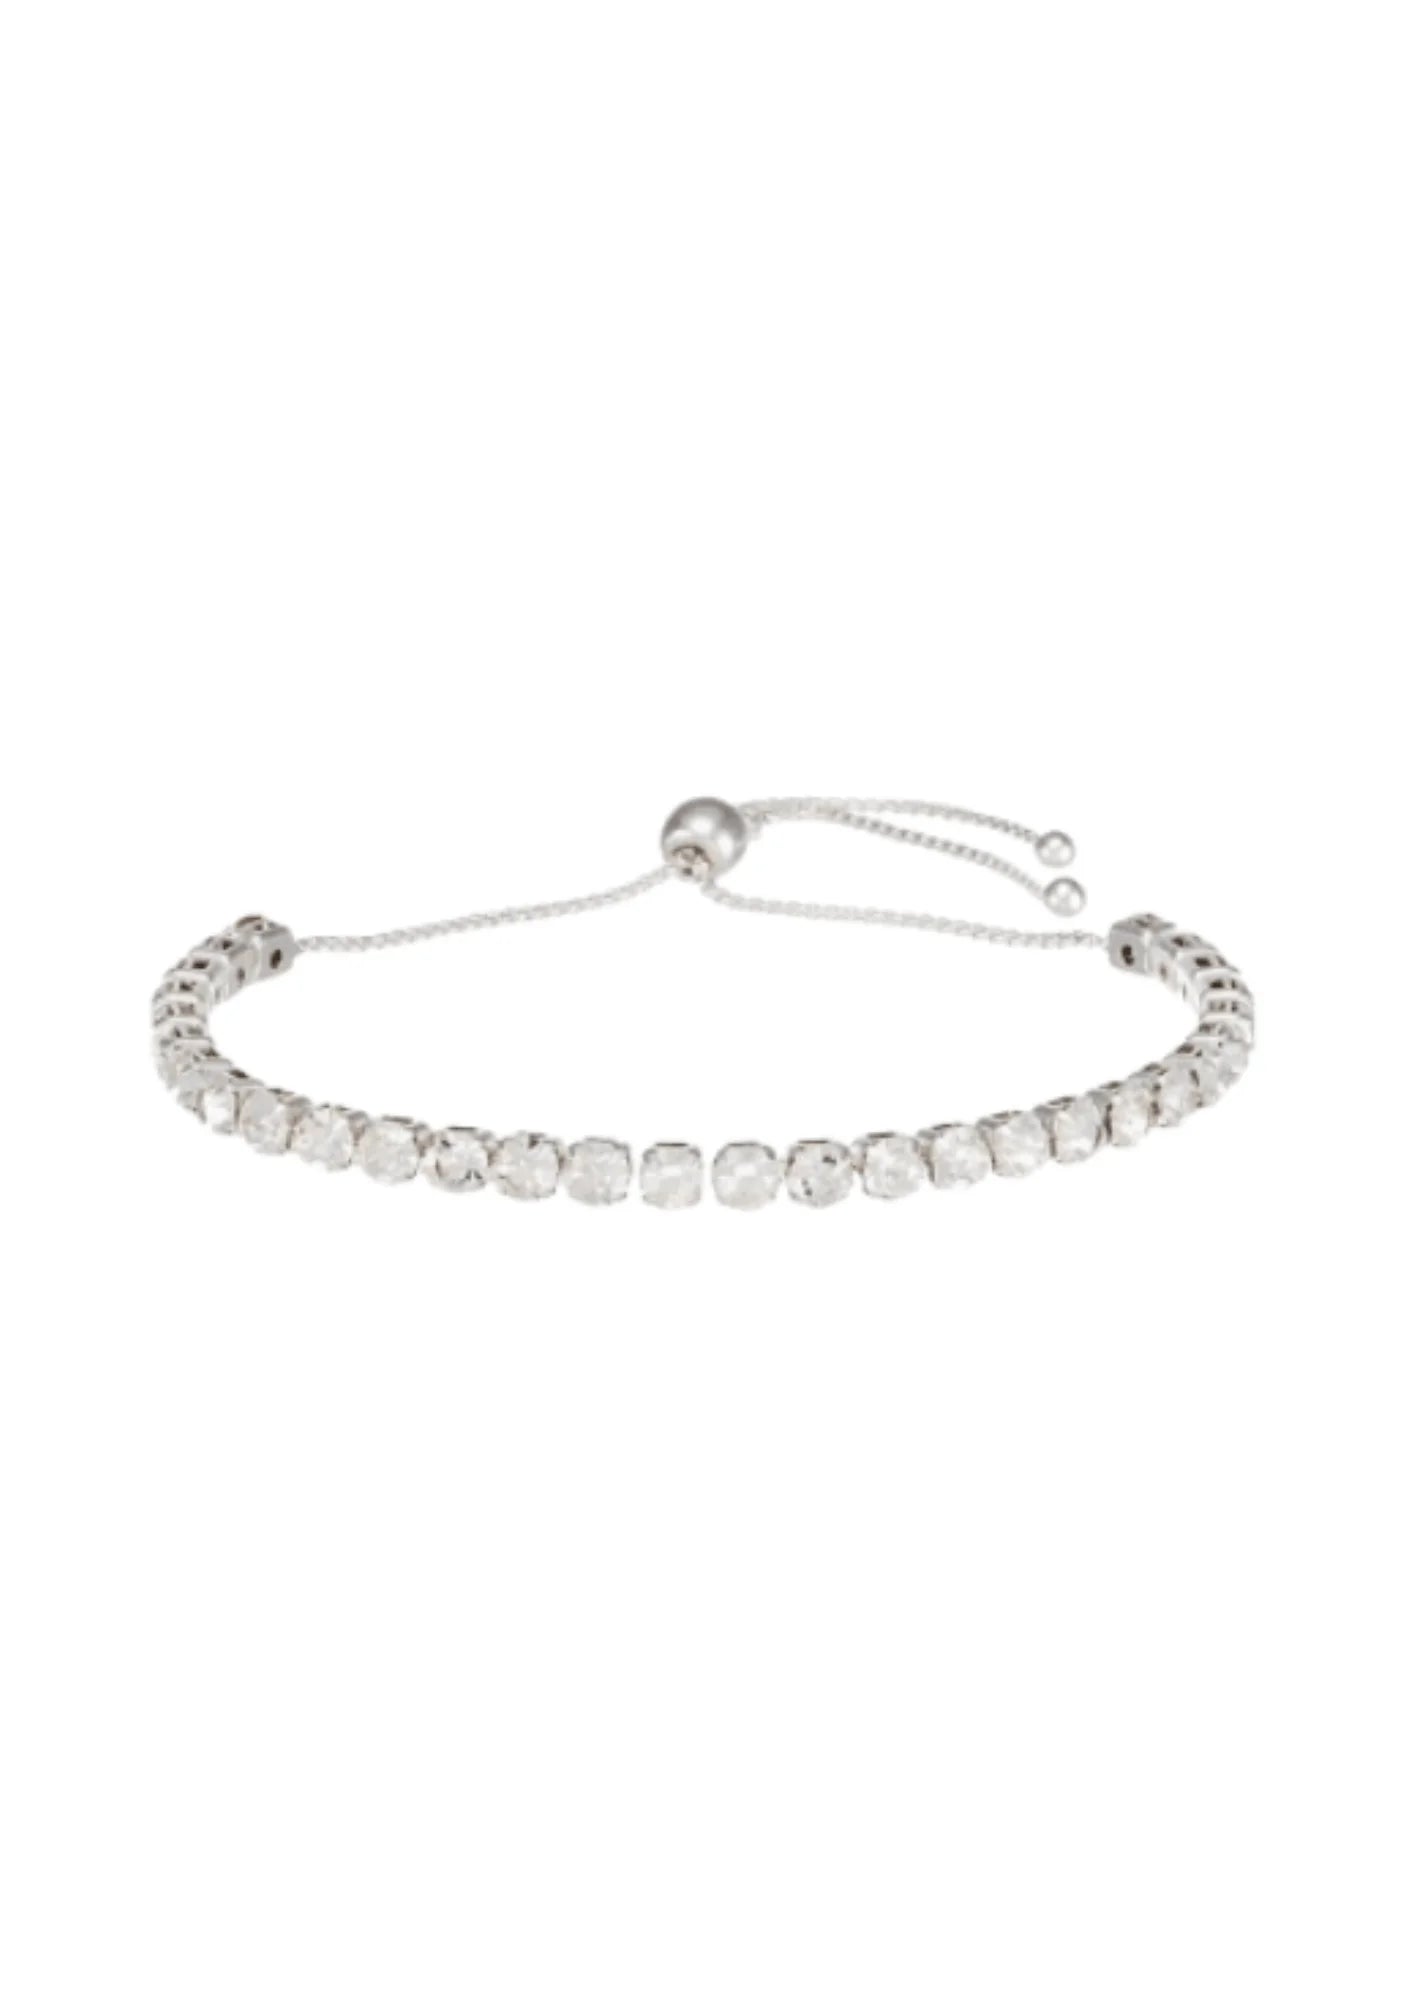 SILVER BRACELET WITH CRYSTALS